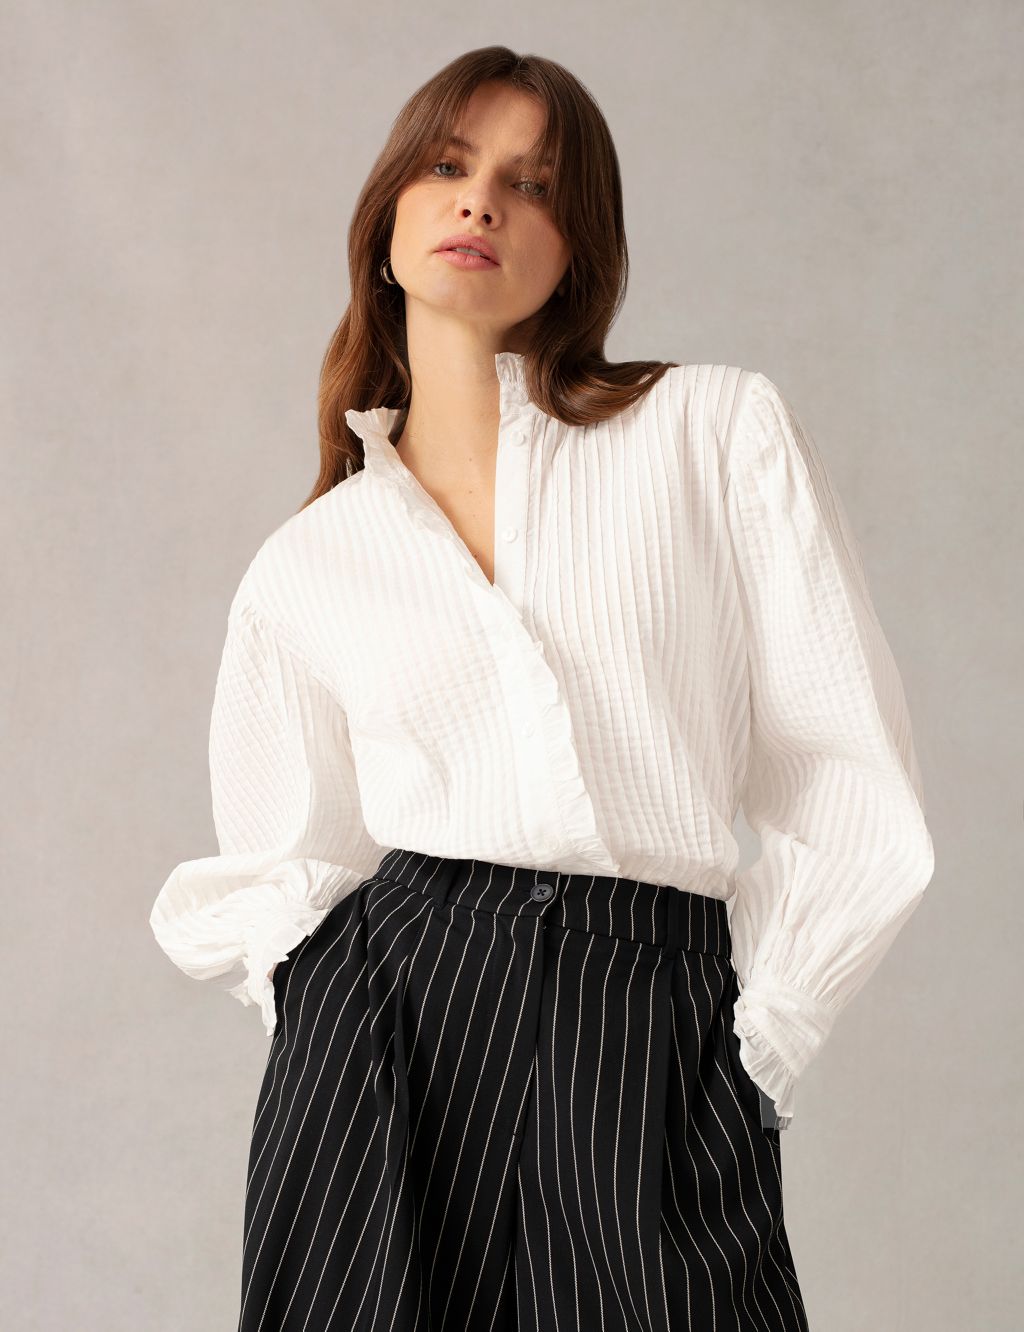 Shop Page 2 - Women’s White Shirts & Blouses at M&S